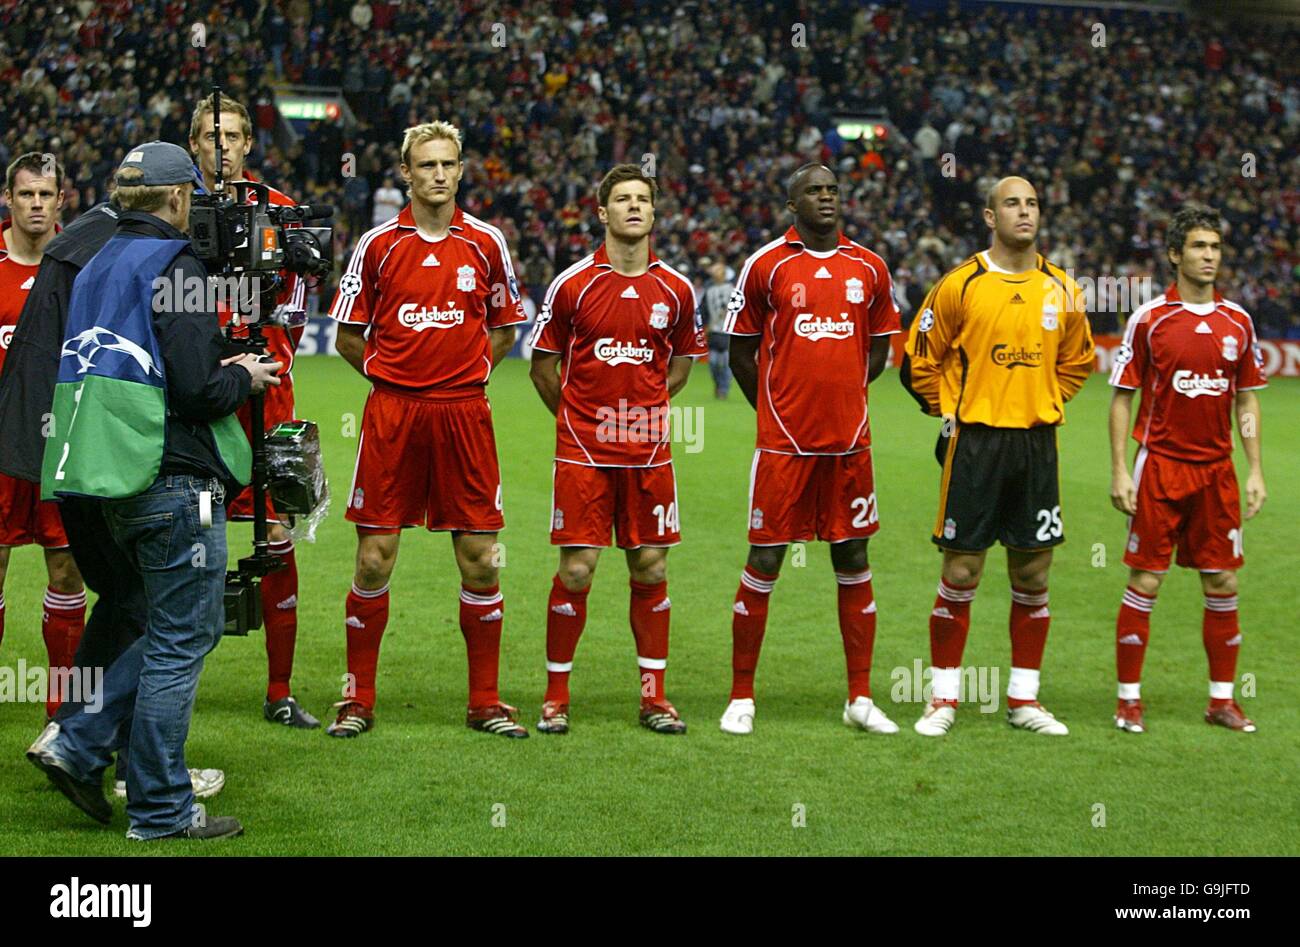 Liverpool players are filmed by a tv camera as they line up prior to the game (l-r Jamie Carragher, Peter Crouch, Samy Hyypia, Xabi Alonso, MOhamed Sissoko, Jose Reina and Sanz Luis